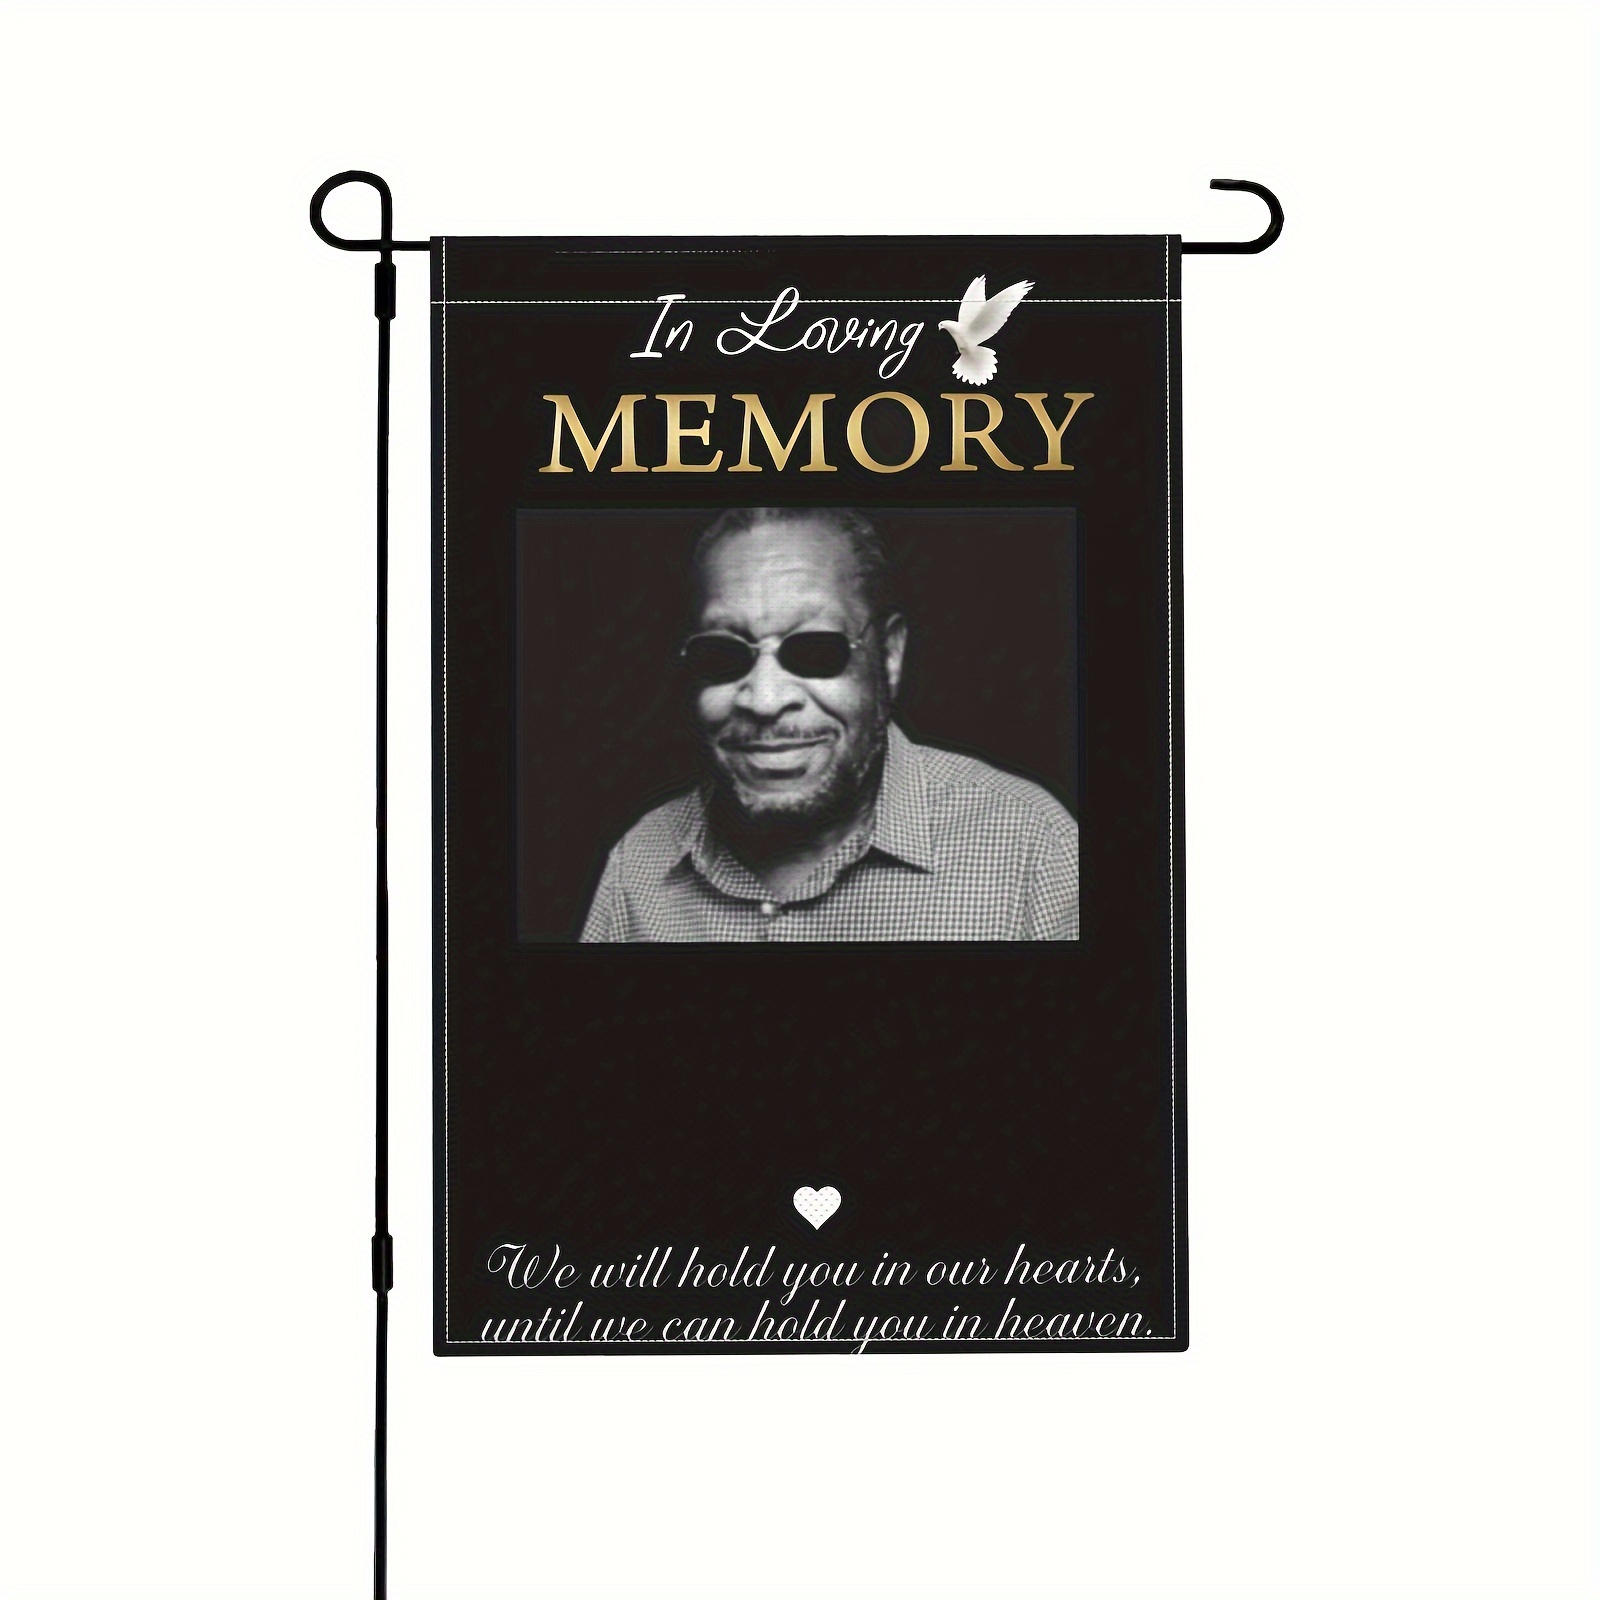 

1pc Personalized Commemorative Flag With Photo Memorial Garden Flag Love Memory Cemetery Garden Flag Memorial Gift Loss Of Relatives Lawn Yard Flag, 12x18 Inch Double Sided (no Flagpole)